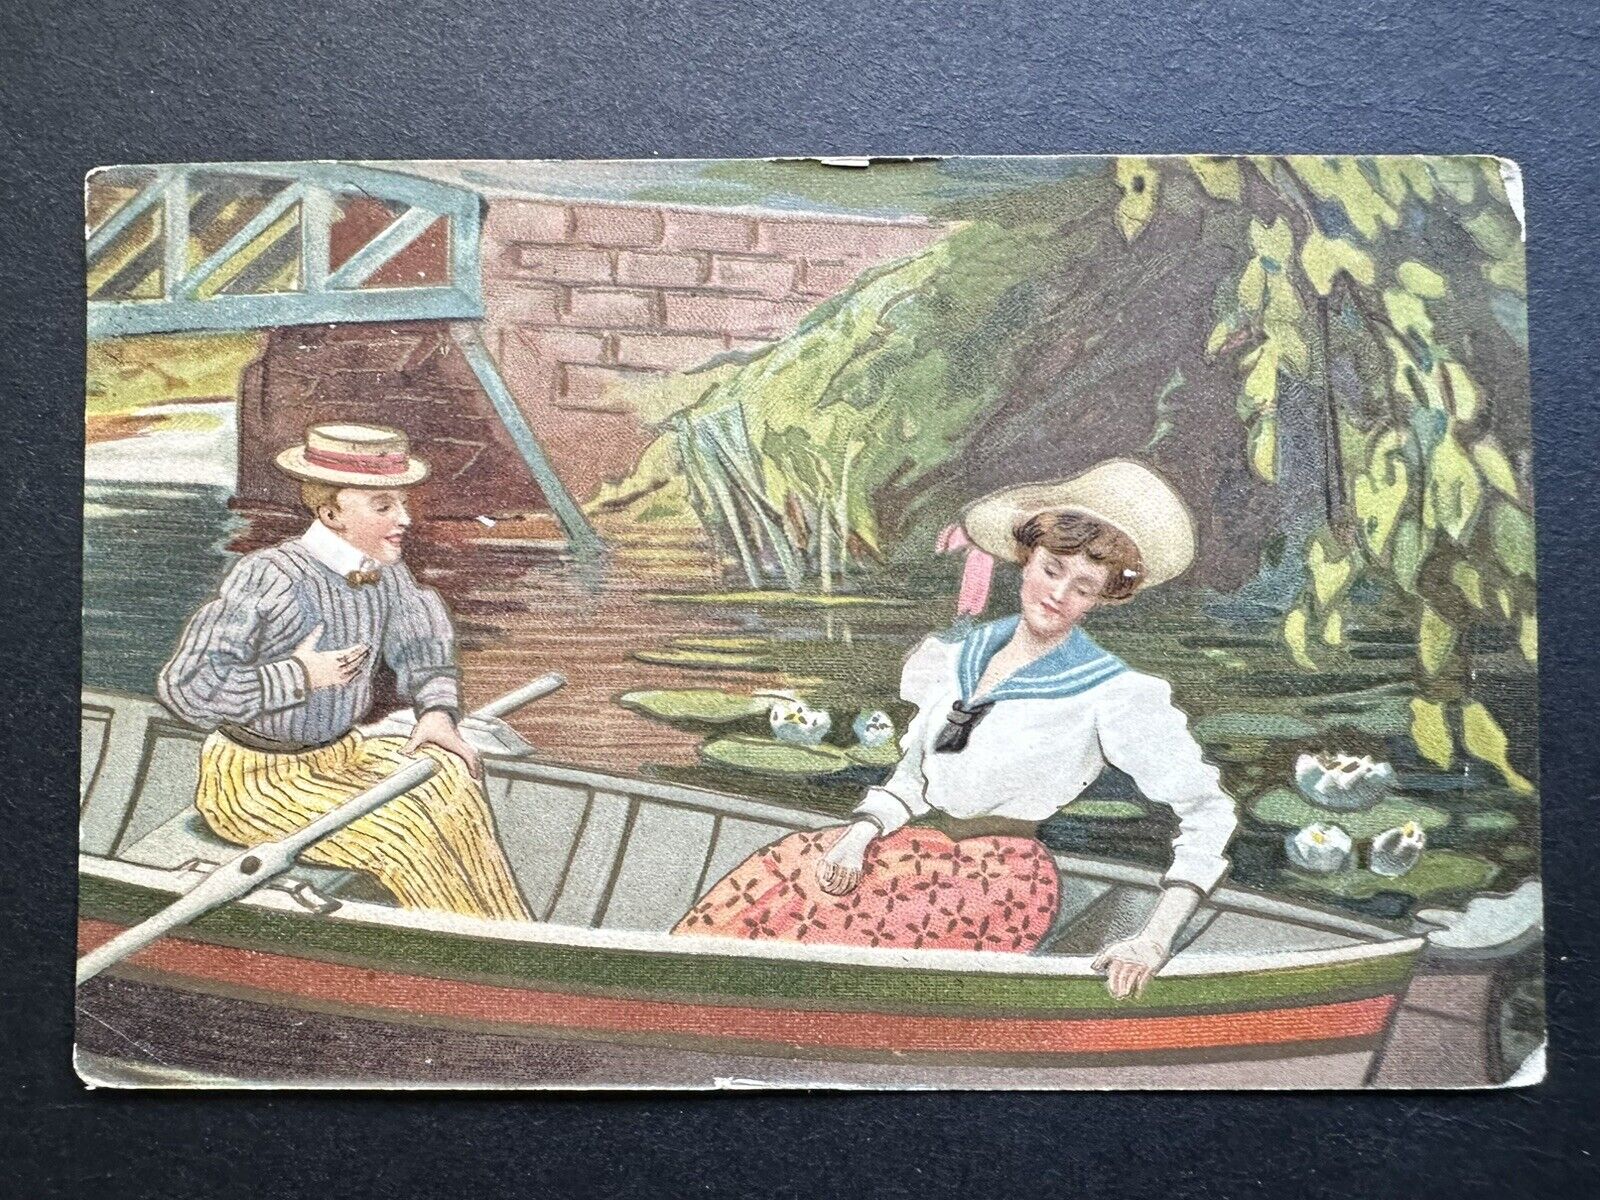 Art Print From Th. E.L. Series Couple Lovers Sitting In Boat 1913 Postcard H43